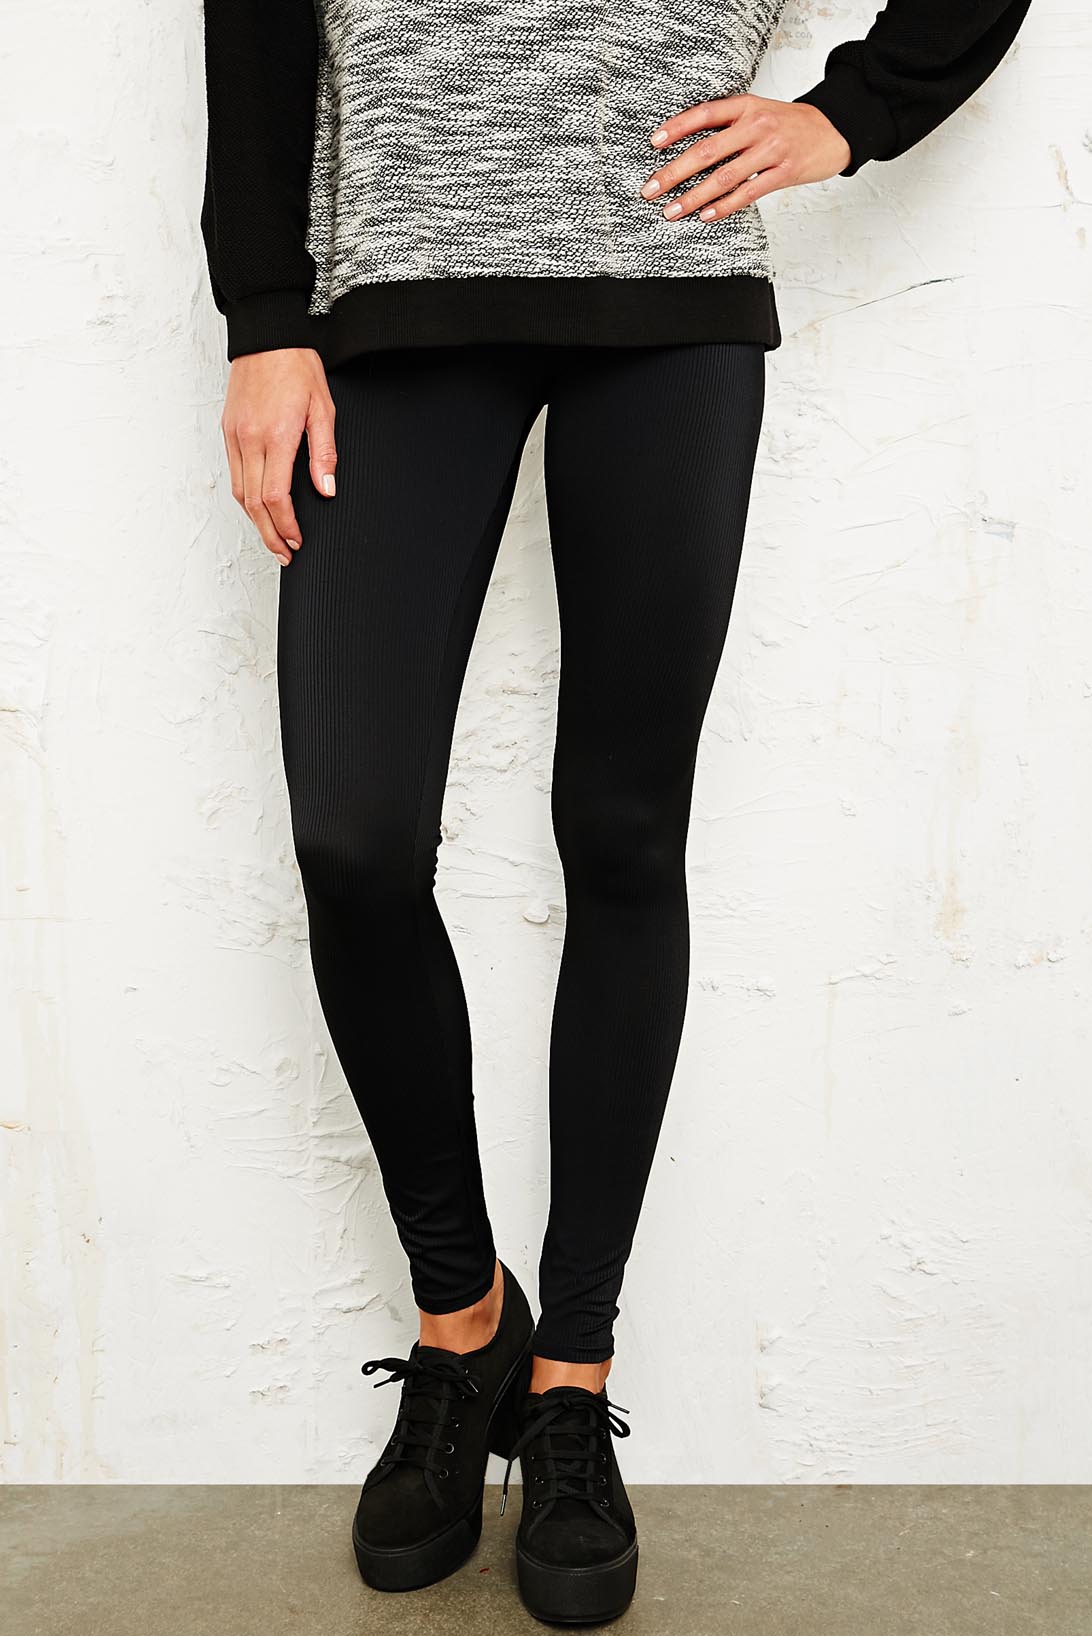 Details about Urban Outfitters Black Ribbed BDG Leggings Shiny BNWT UK ...